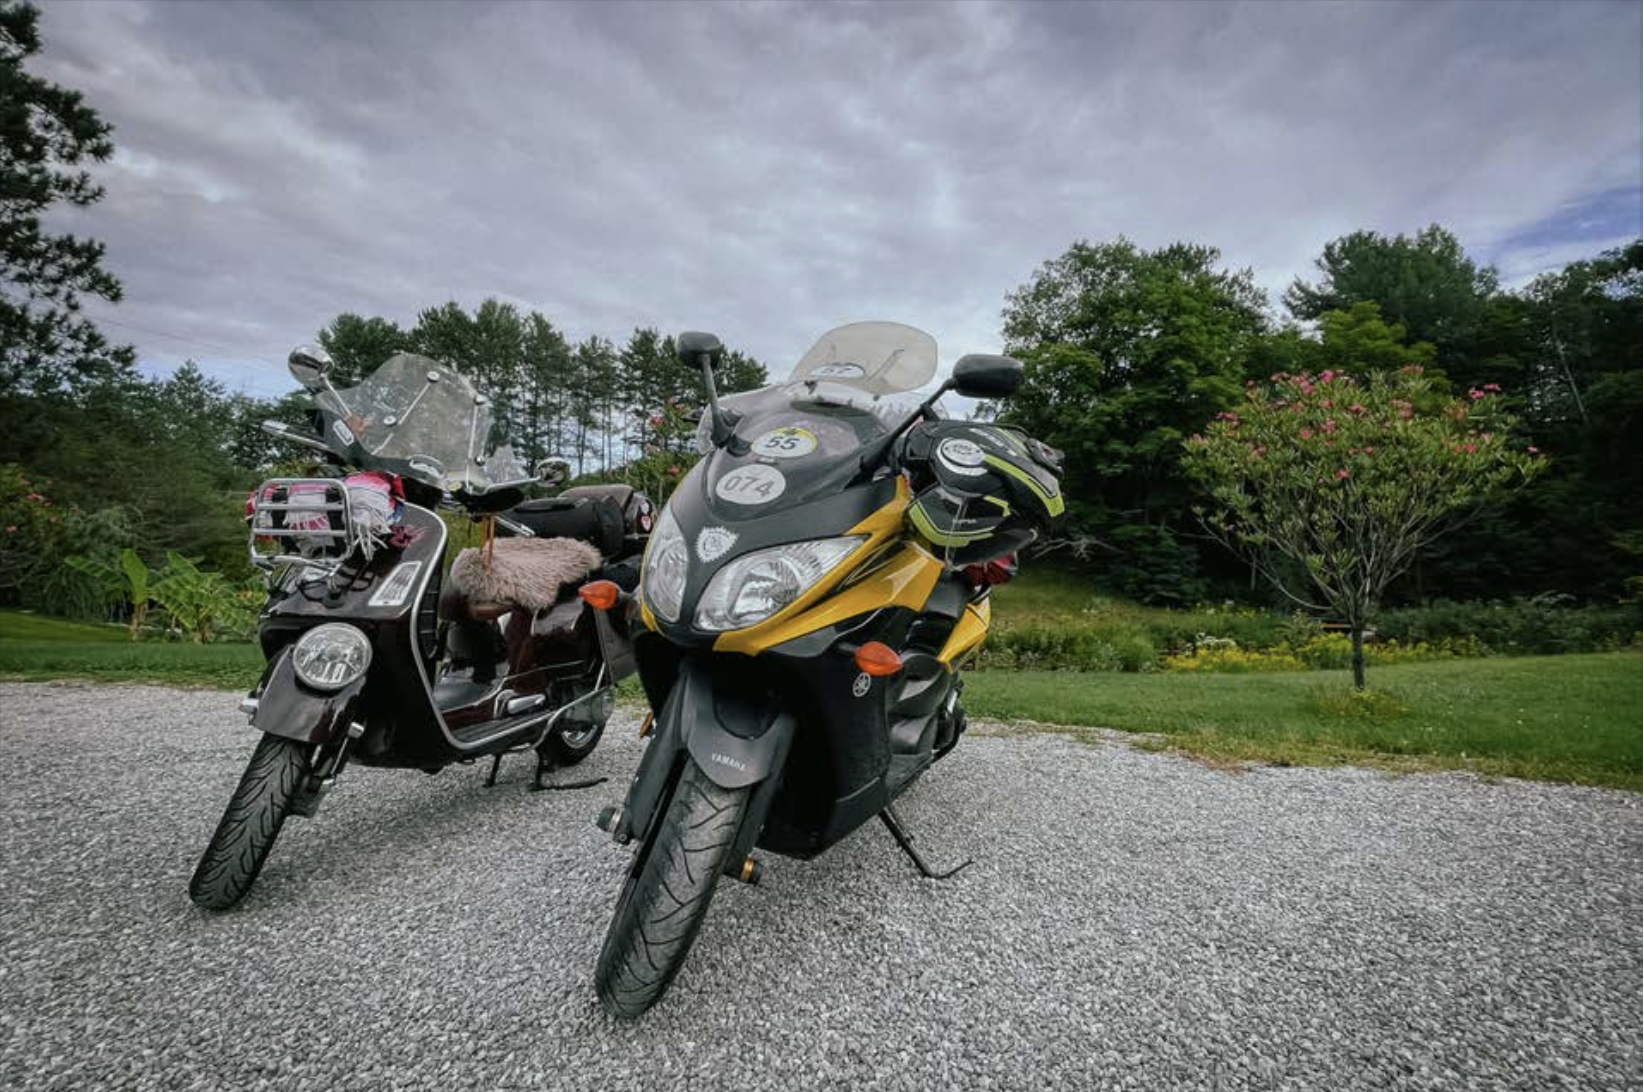 two motorcycles parked side by side on gravel, with lush green grass and trees and stormy grey clouds in the background.